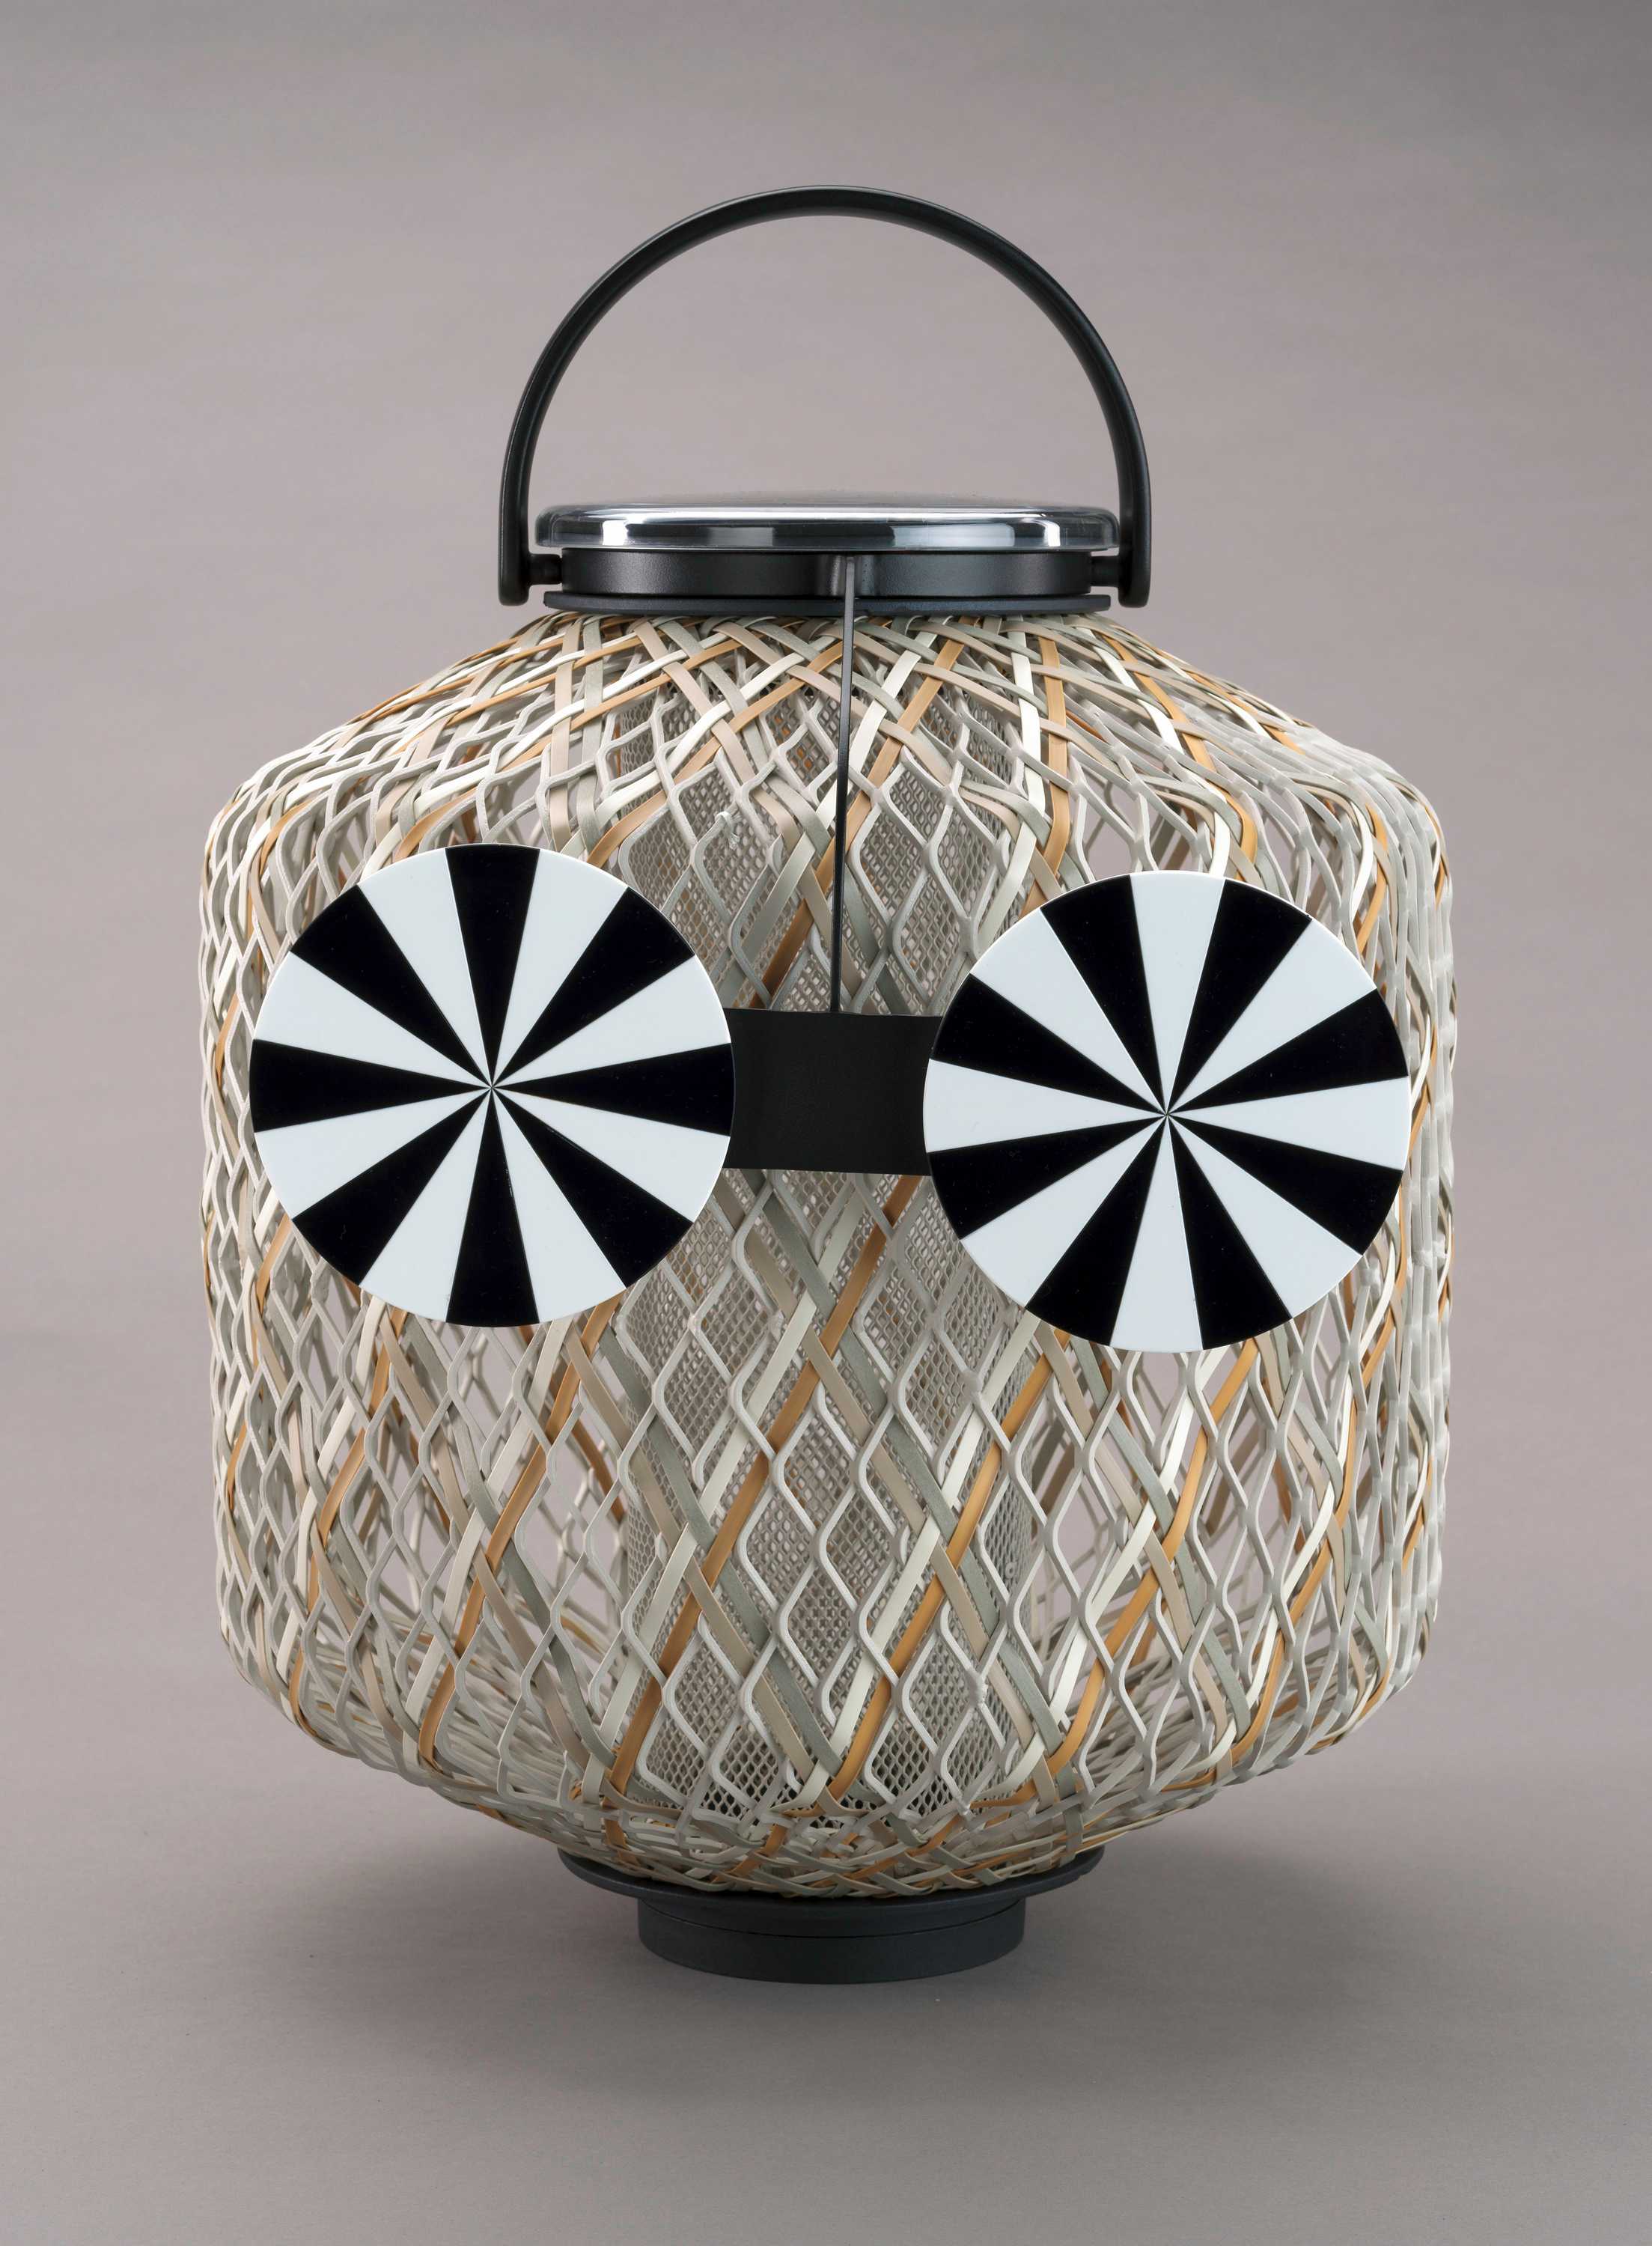 Lantern  with white-coated aluminum frame with interwoven fibers.  It sits on a black base and has a curved black handle on top.